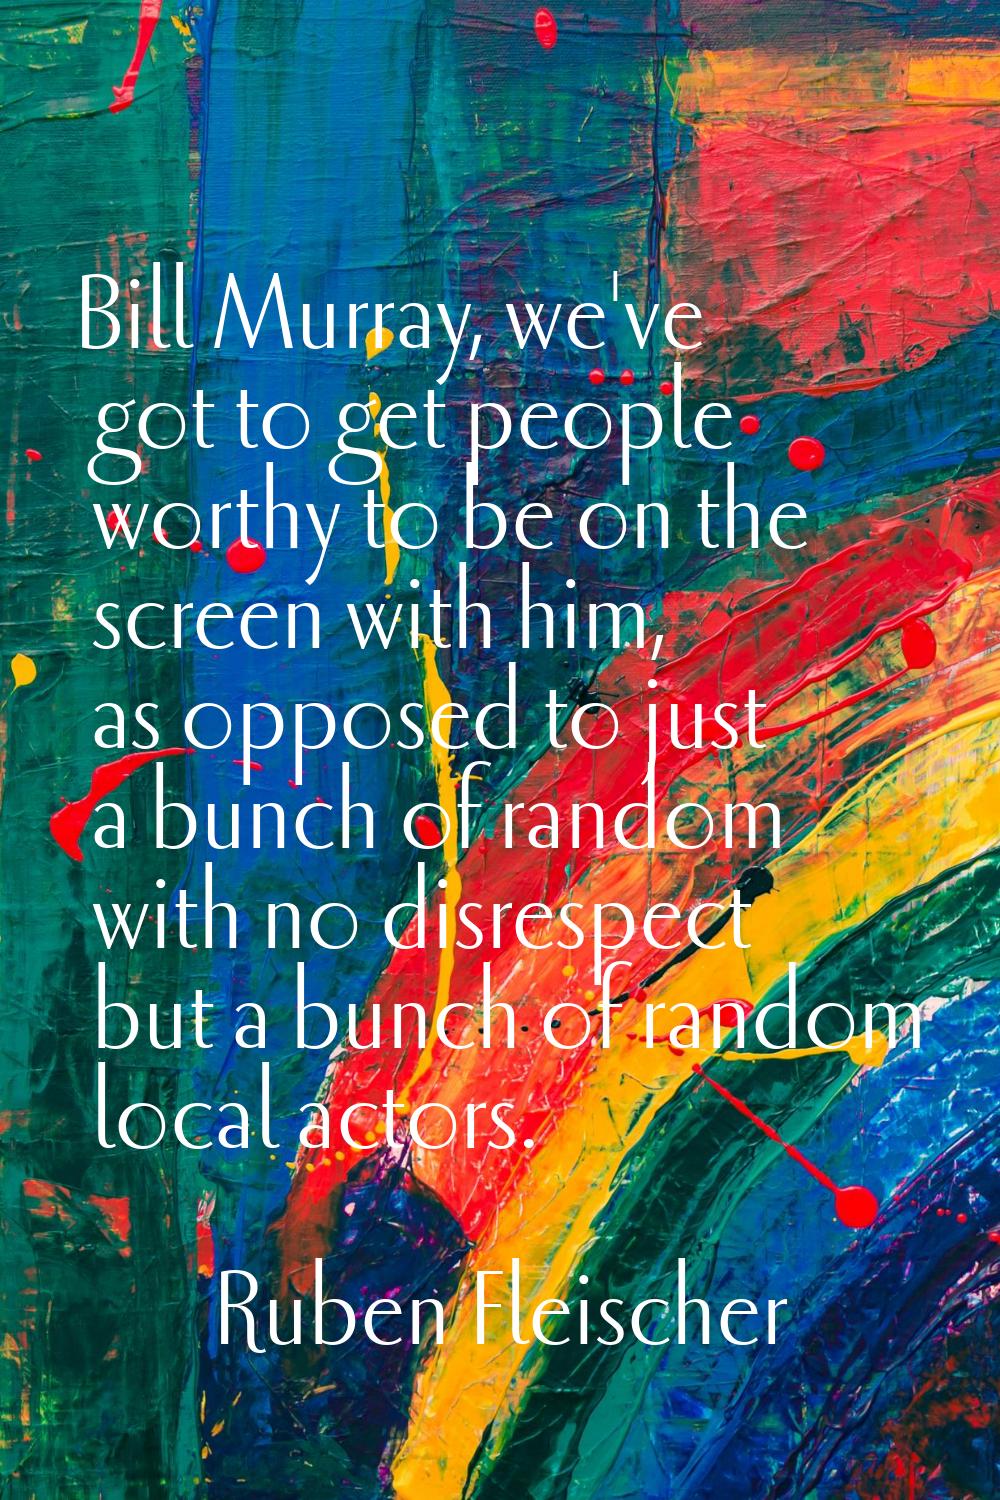 Bill Murray, we've got to get people worthy to be on the screen with him, as opposed to just a bunc